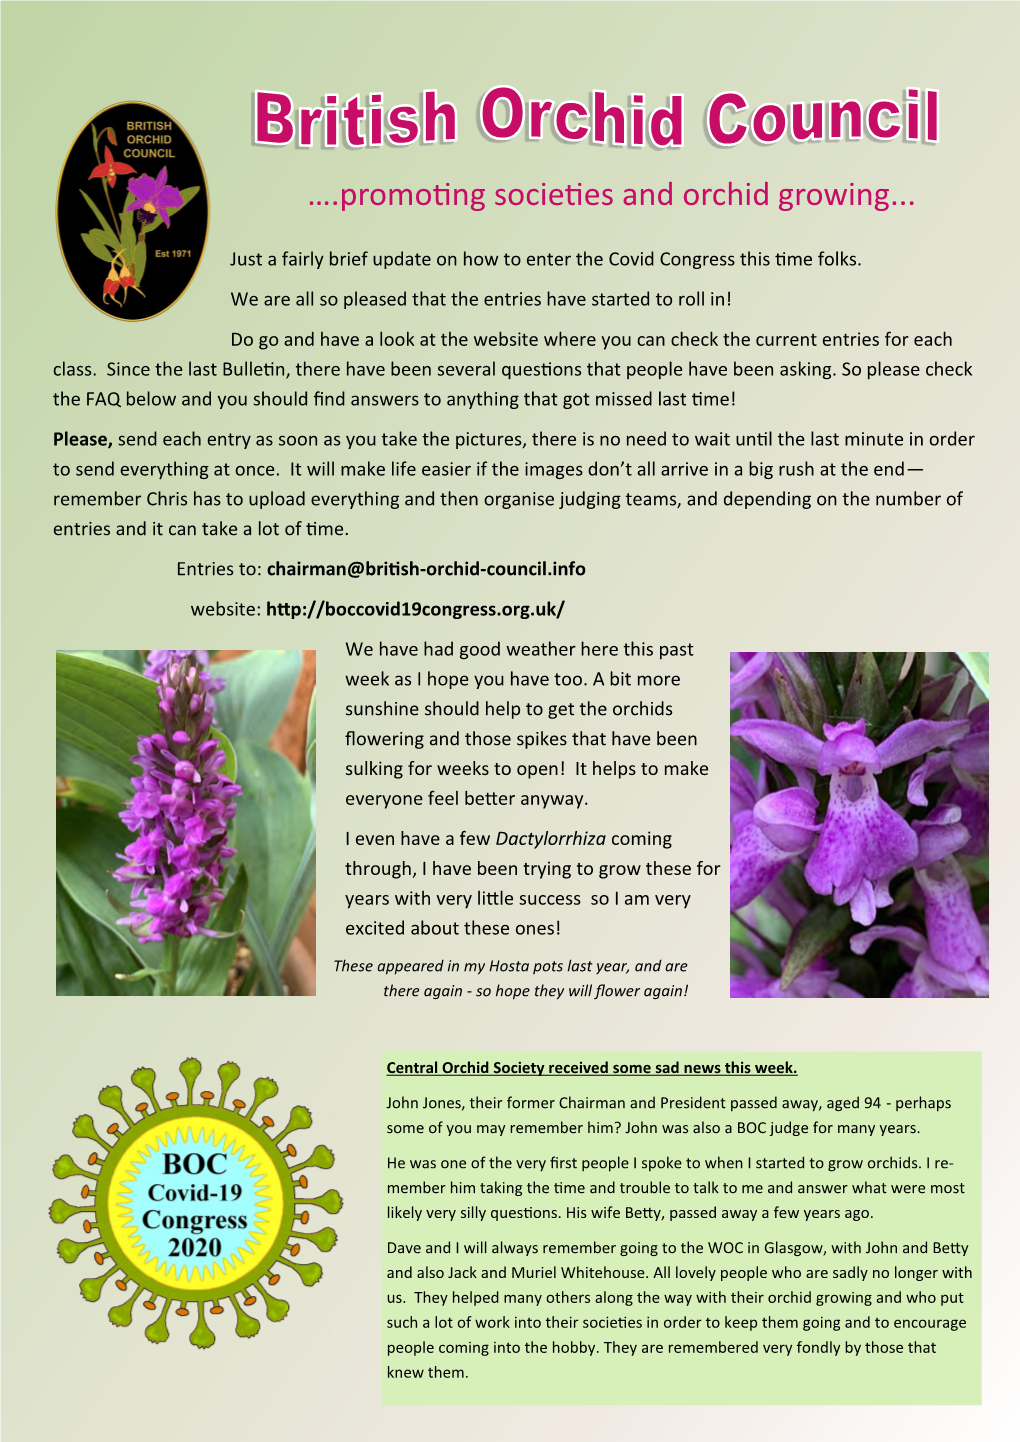 ….Promoting Societies and Orchid Growing